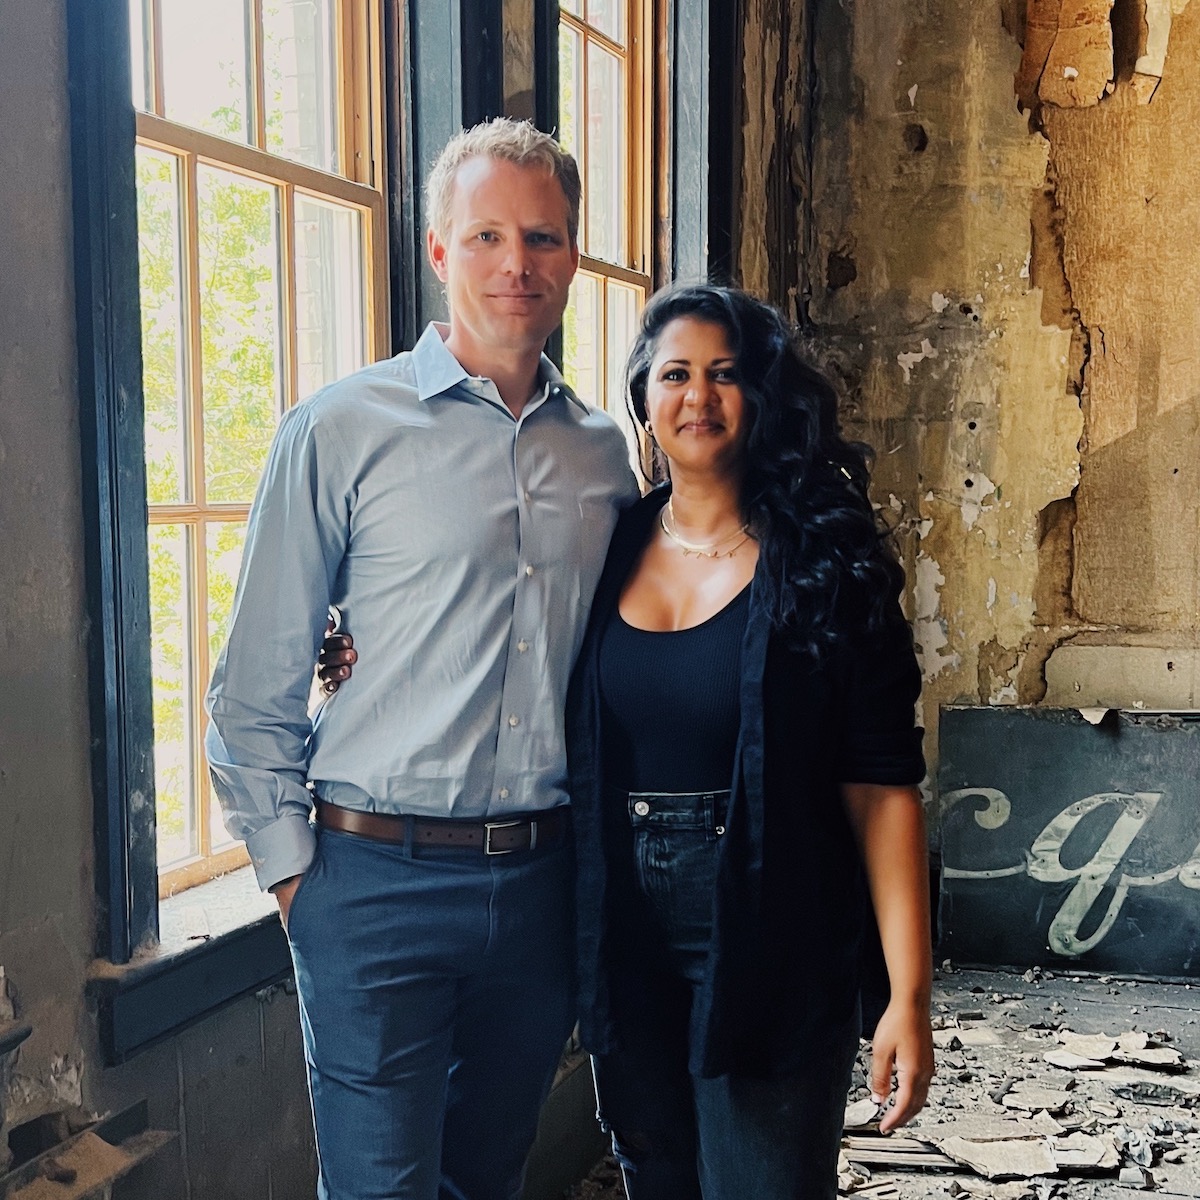 Hotel Trundle co-owners Marcus Munse and Rita Patel are adding a new wing to their boutique hotel. (Photo/Provided)